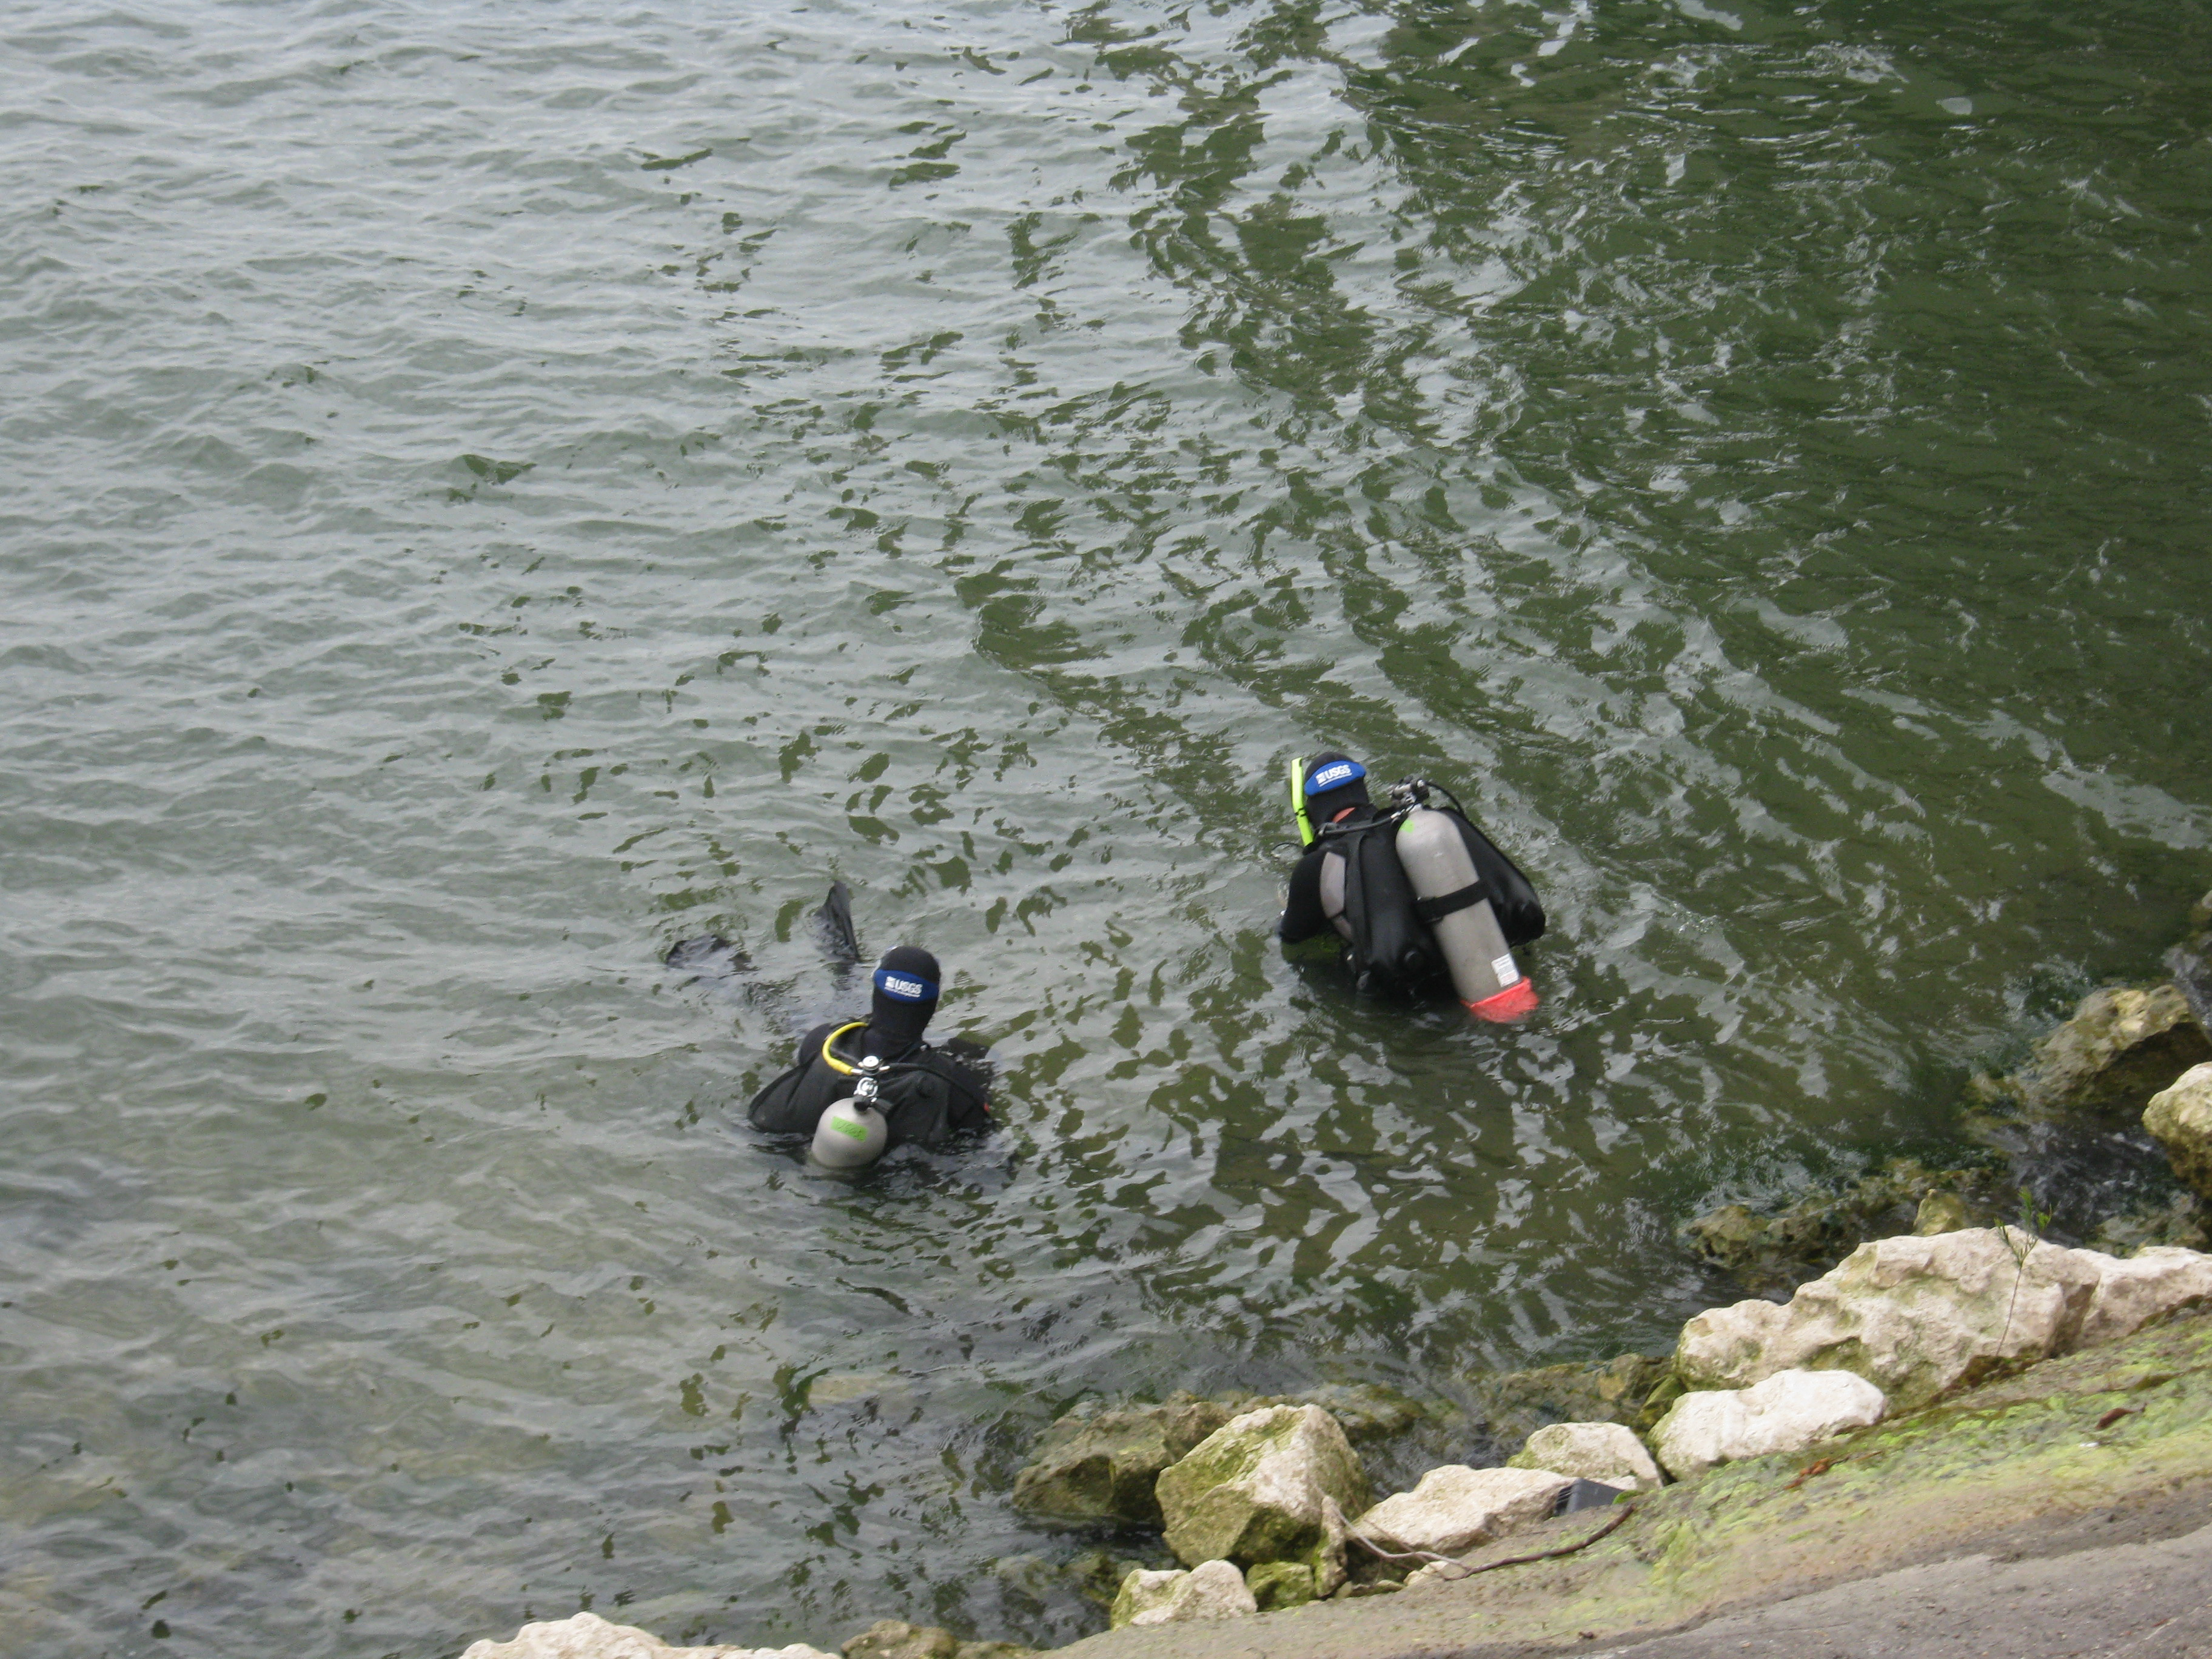 Two scuba divers, in the water a few feet from the rocky lake edge, beginning to swim